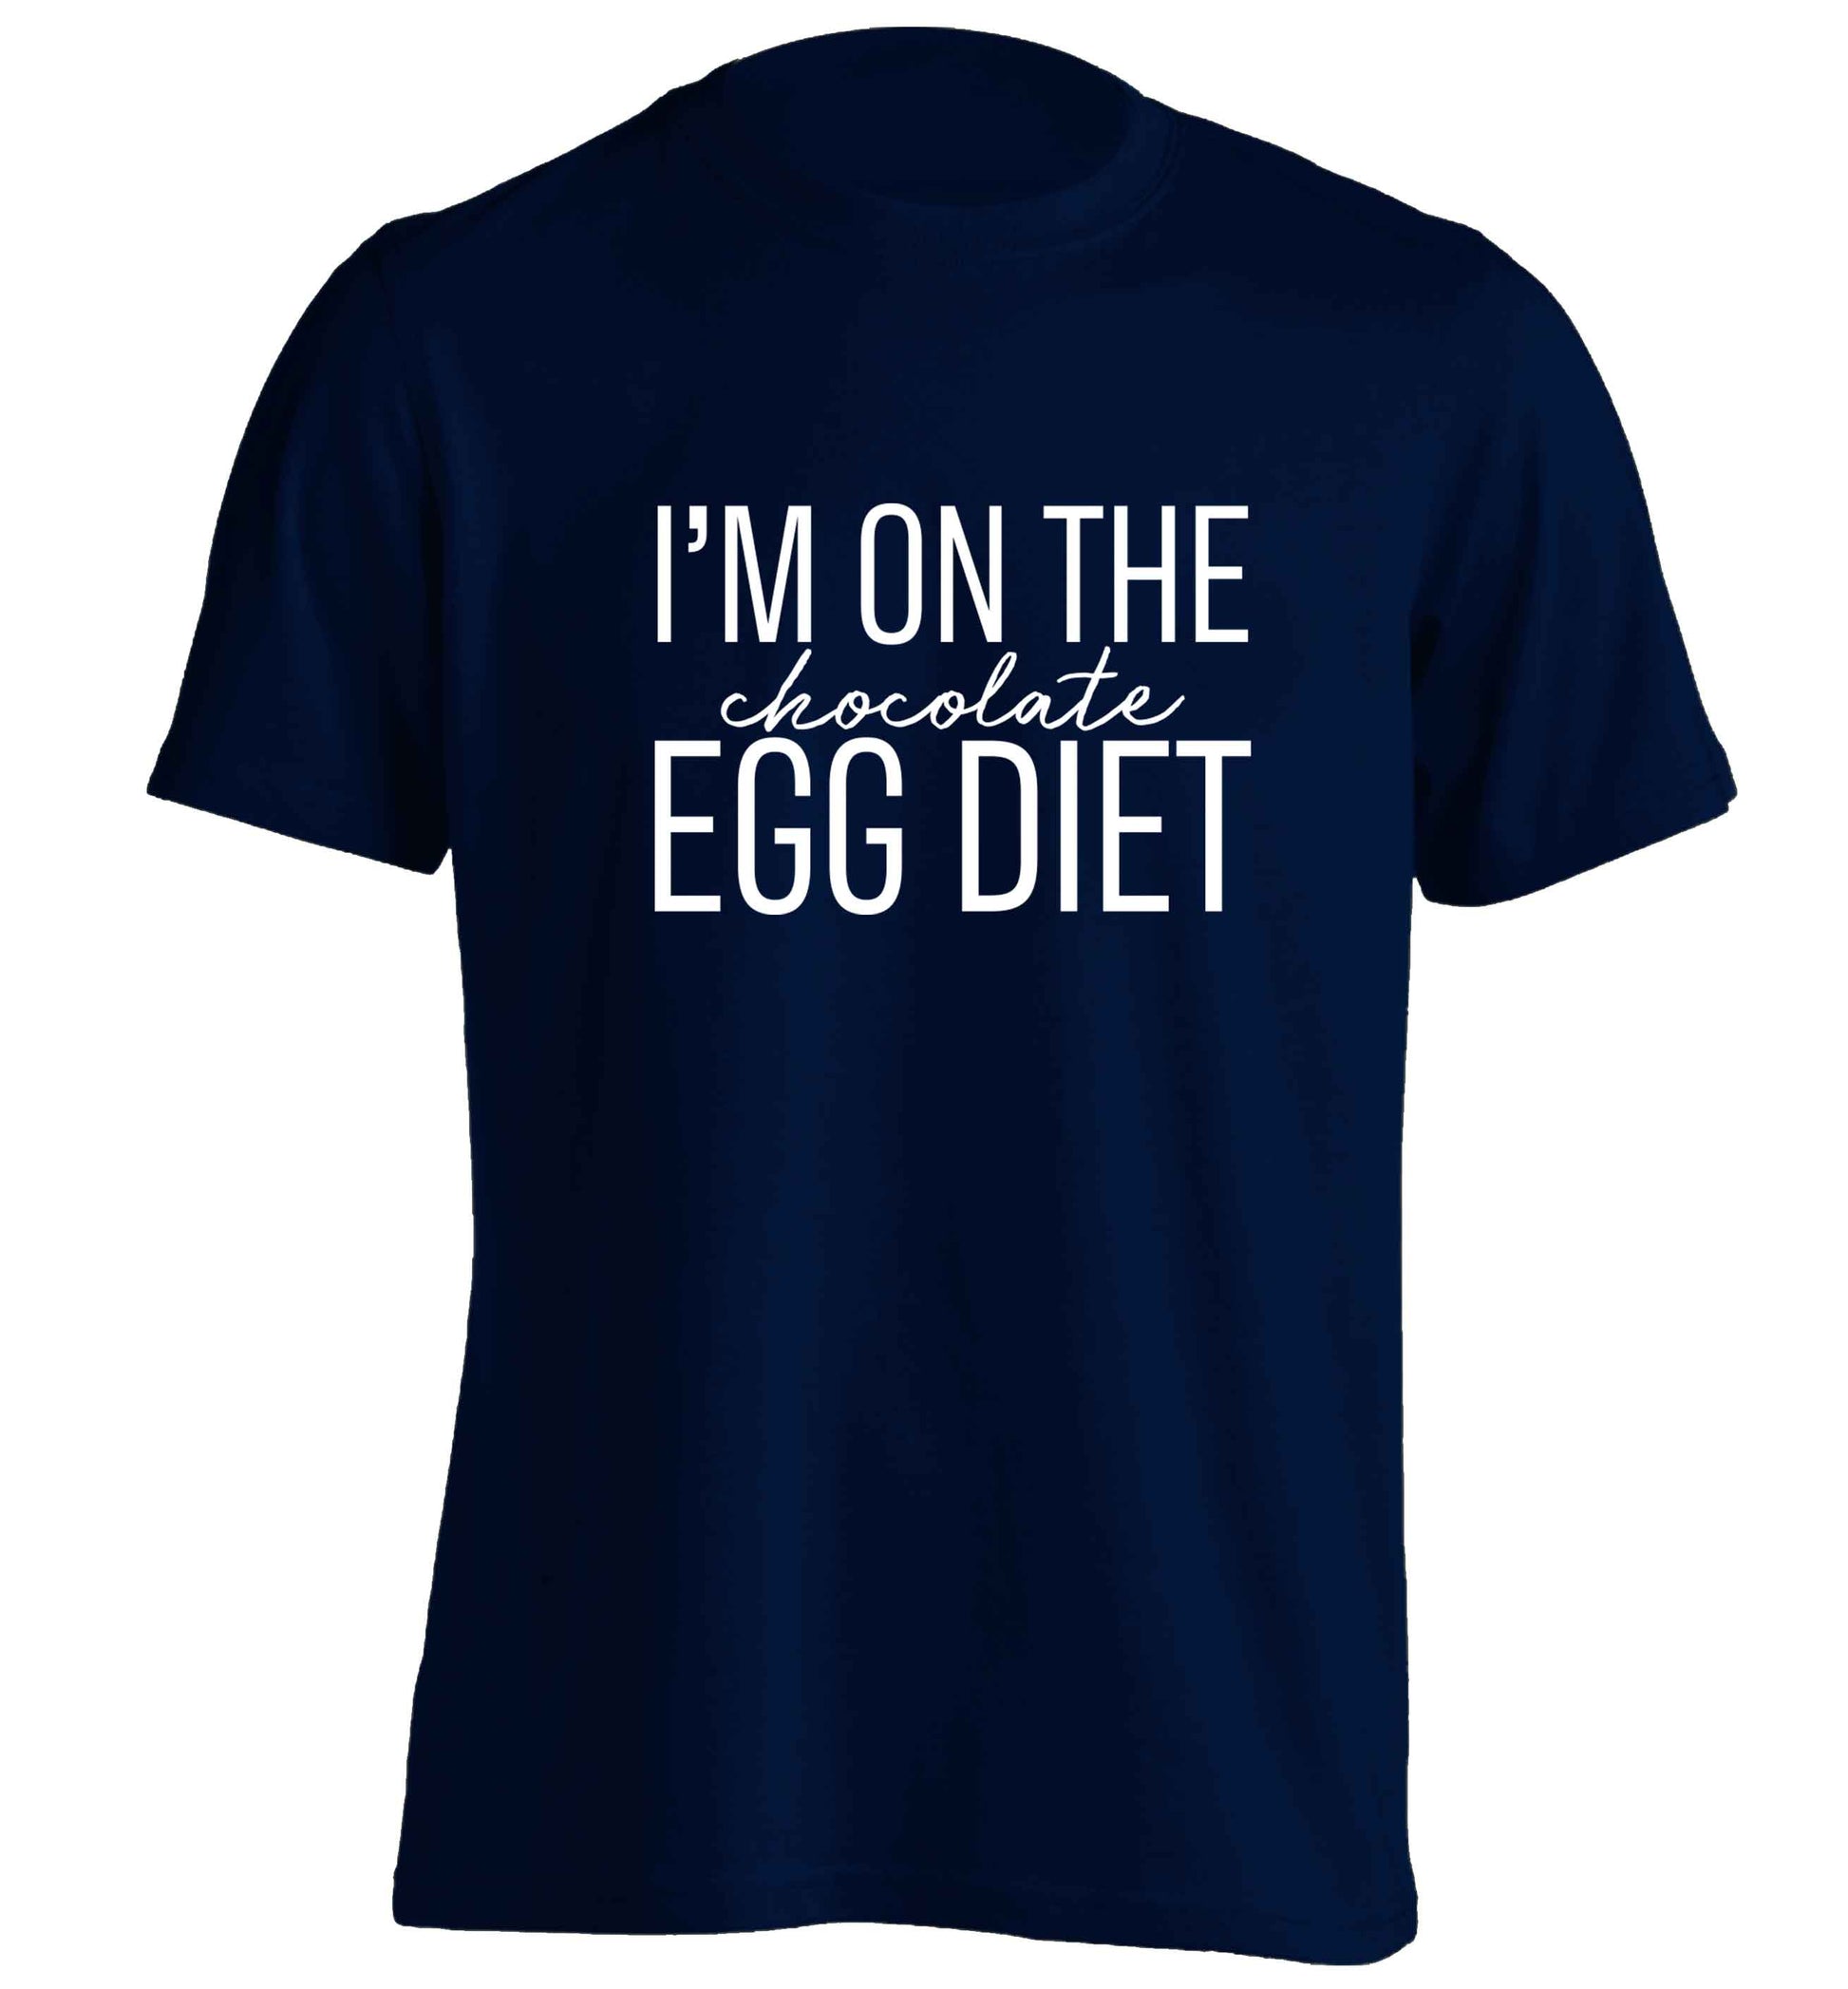 I'm on the chocolate egg diet adults unisex navy Tshirt 2XL